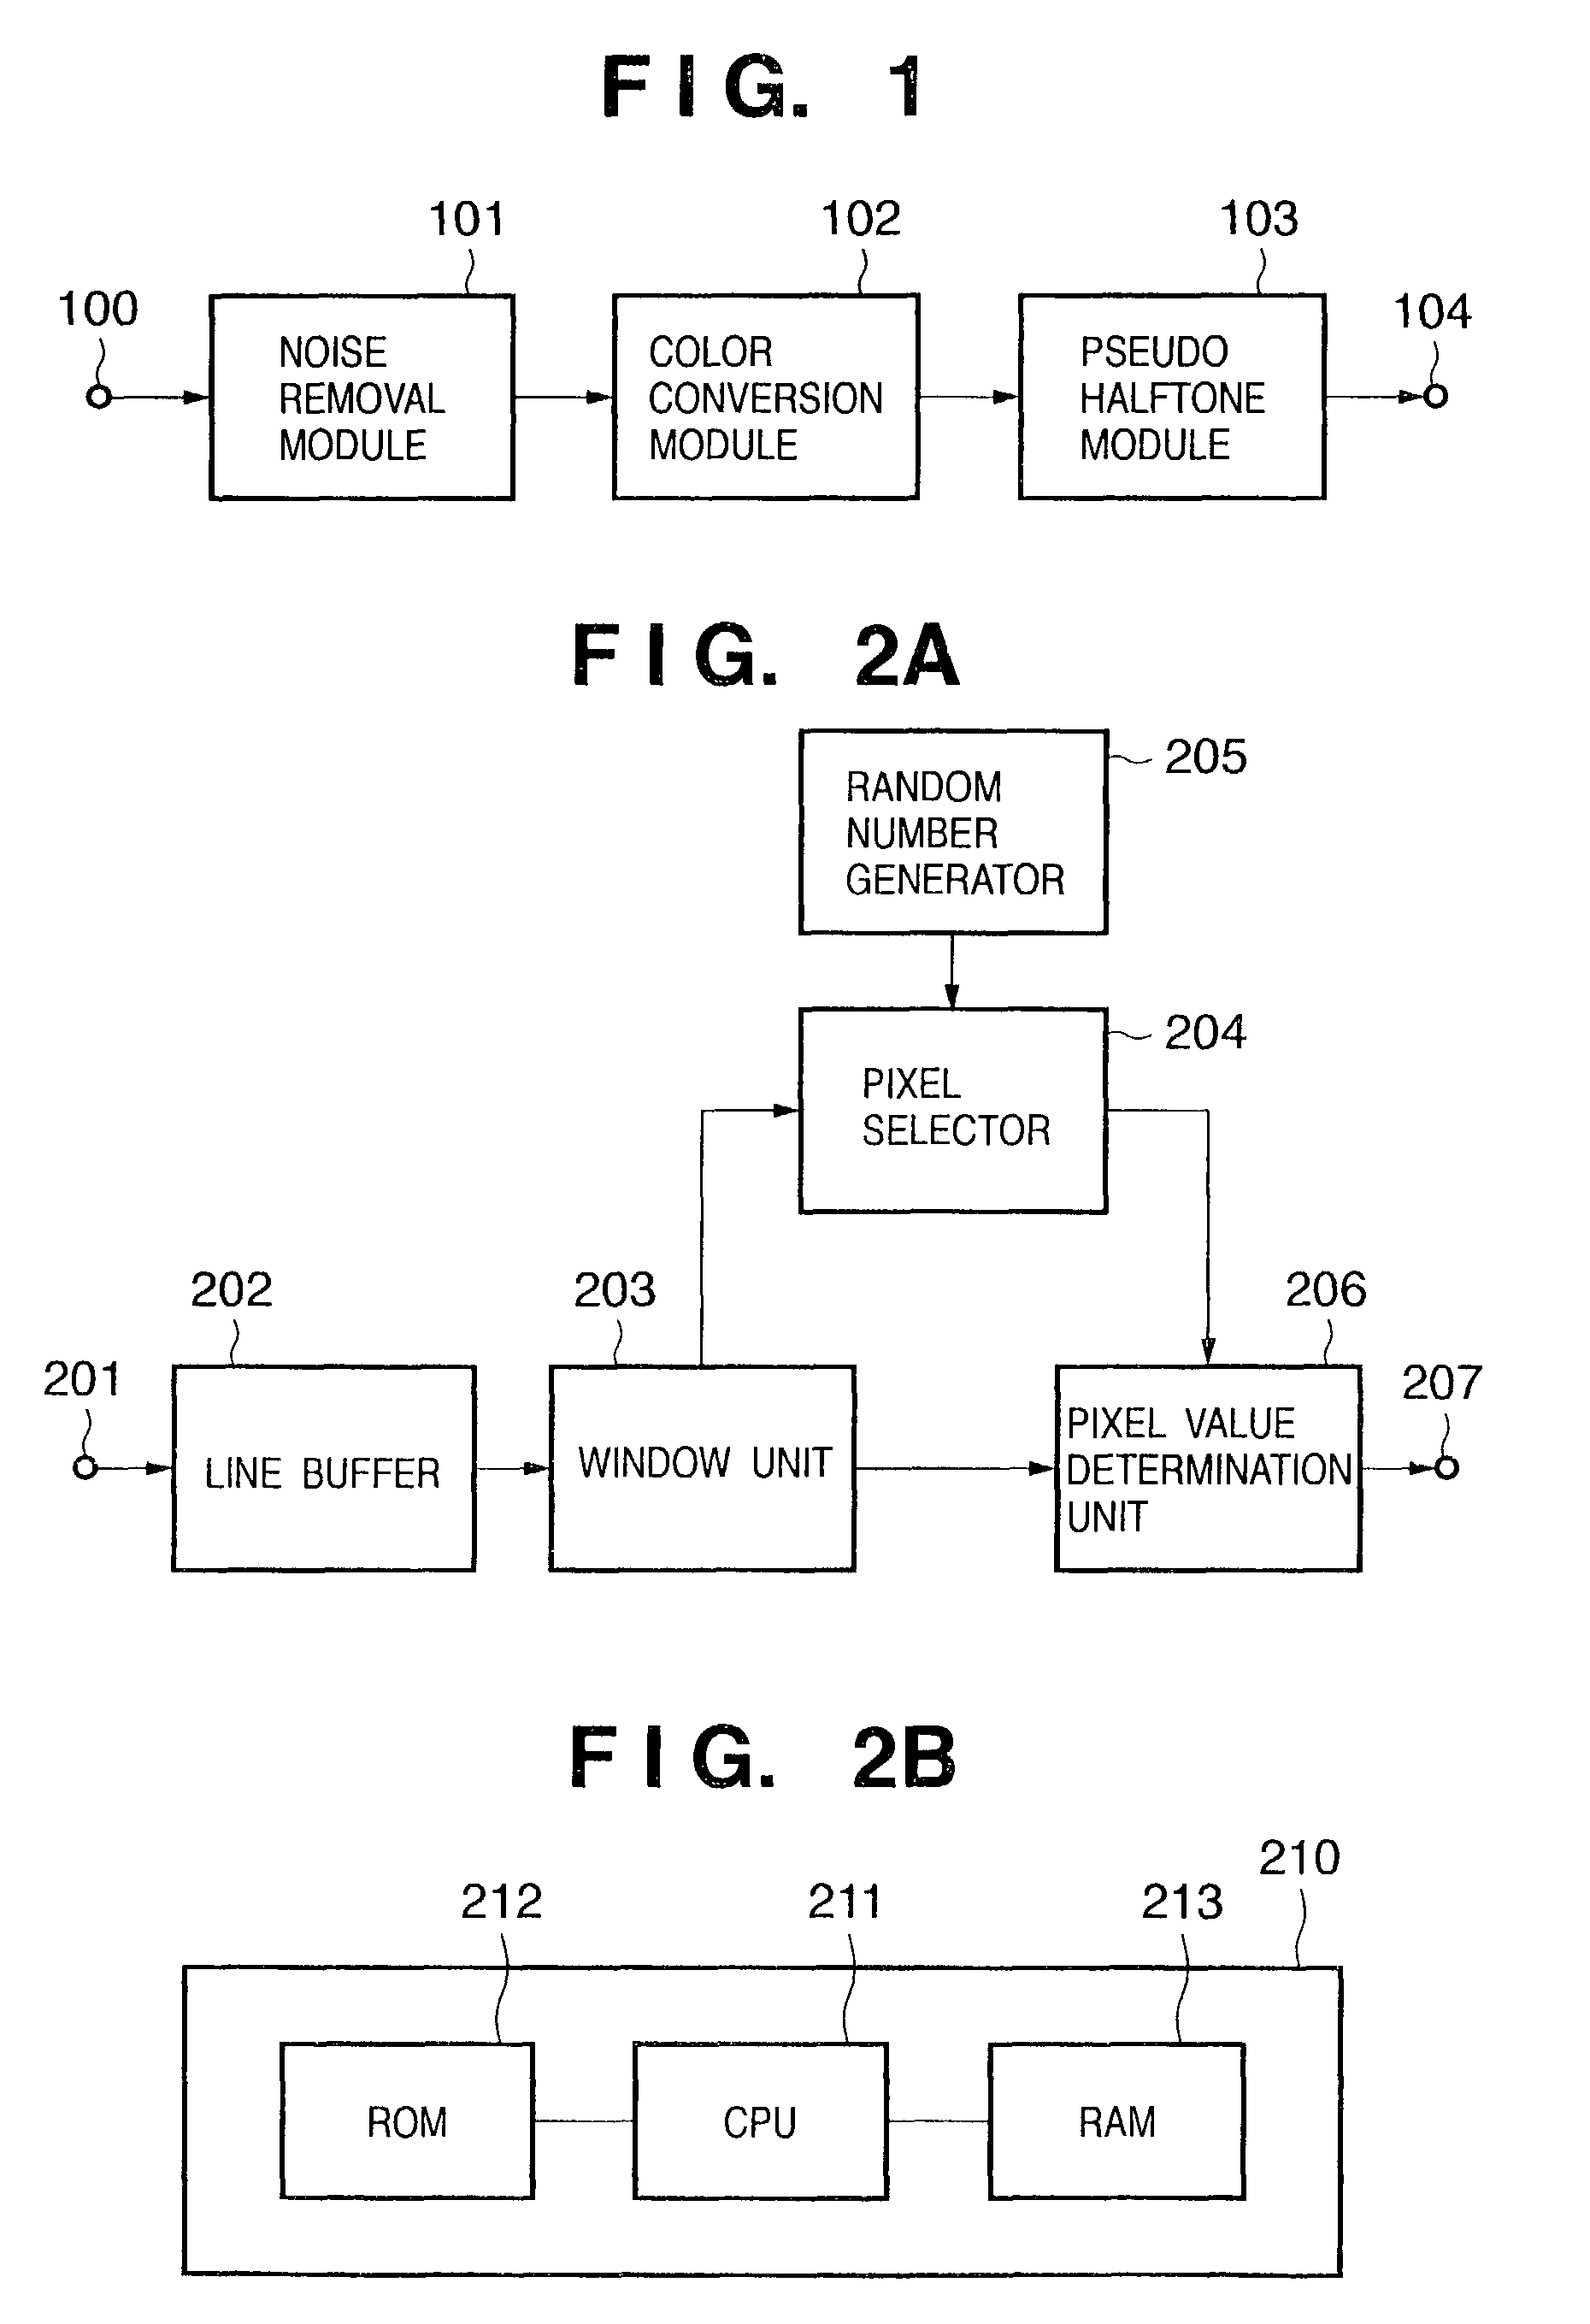 Image processing apparatus, image processing method, and a program, for removing low-frequency noise from image data